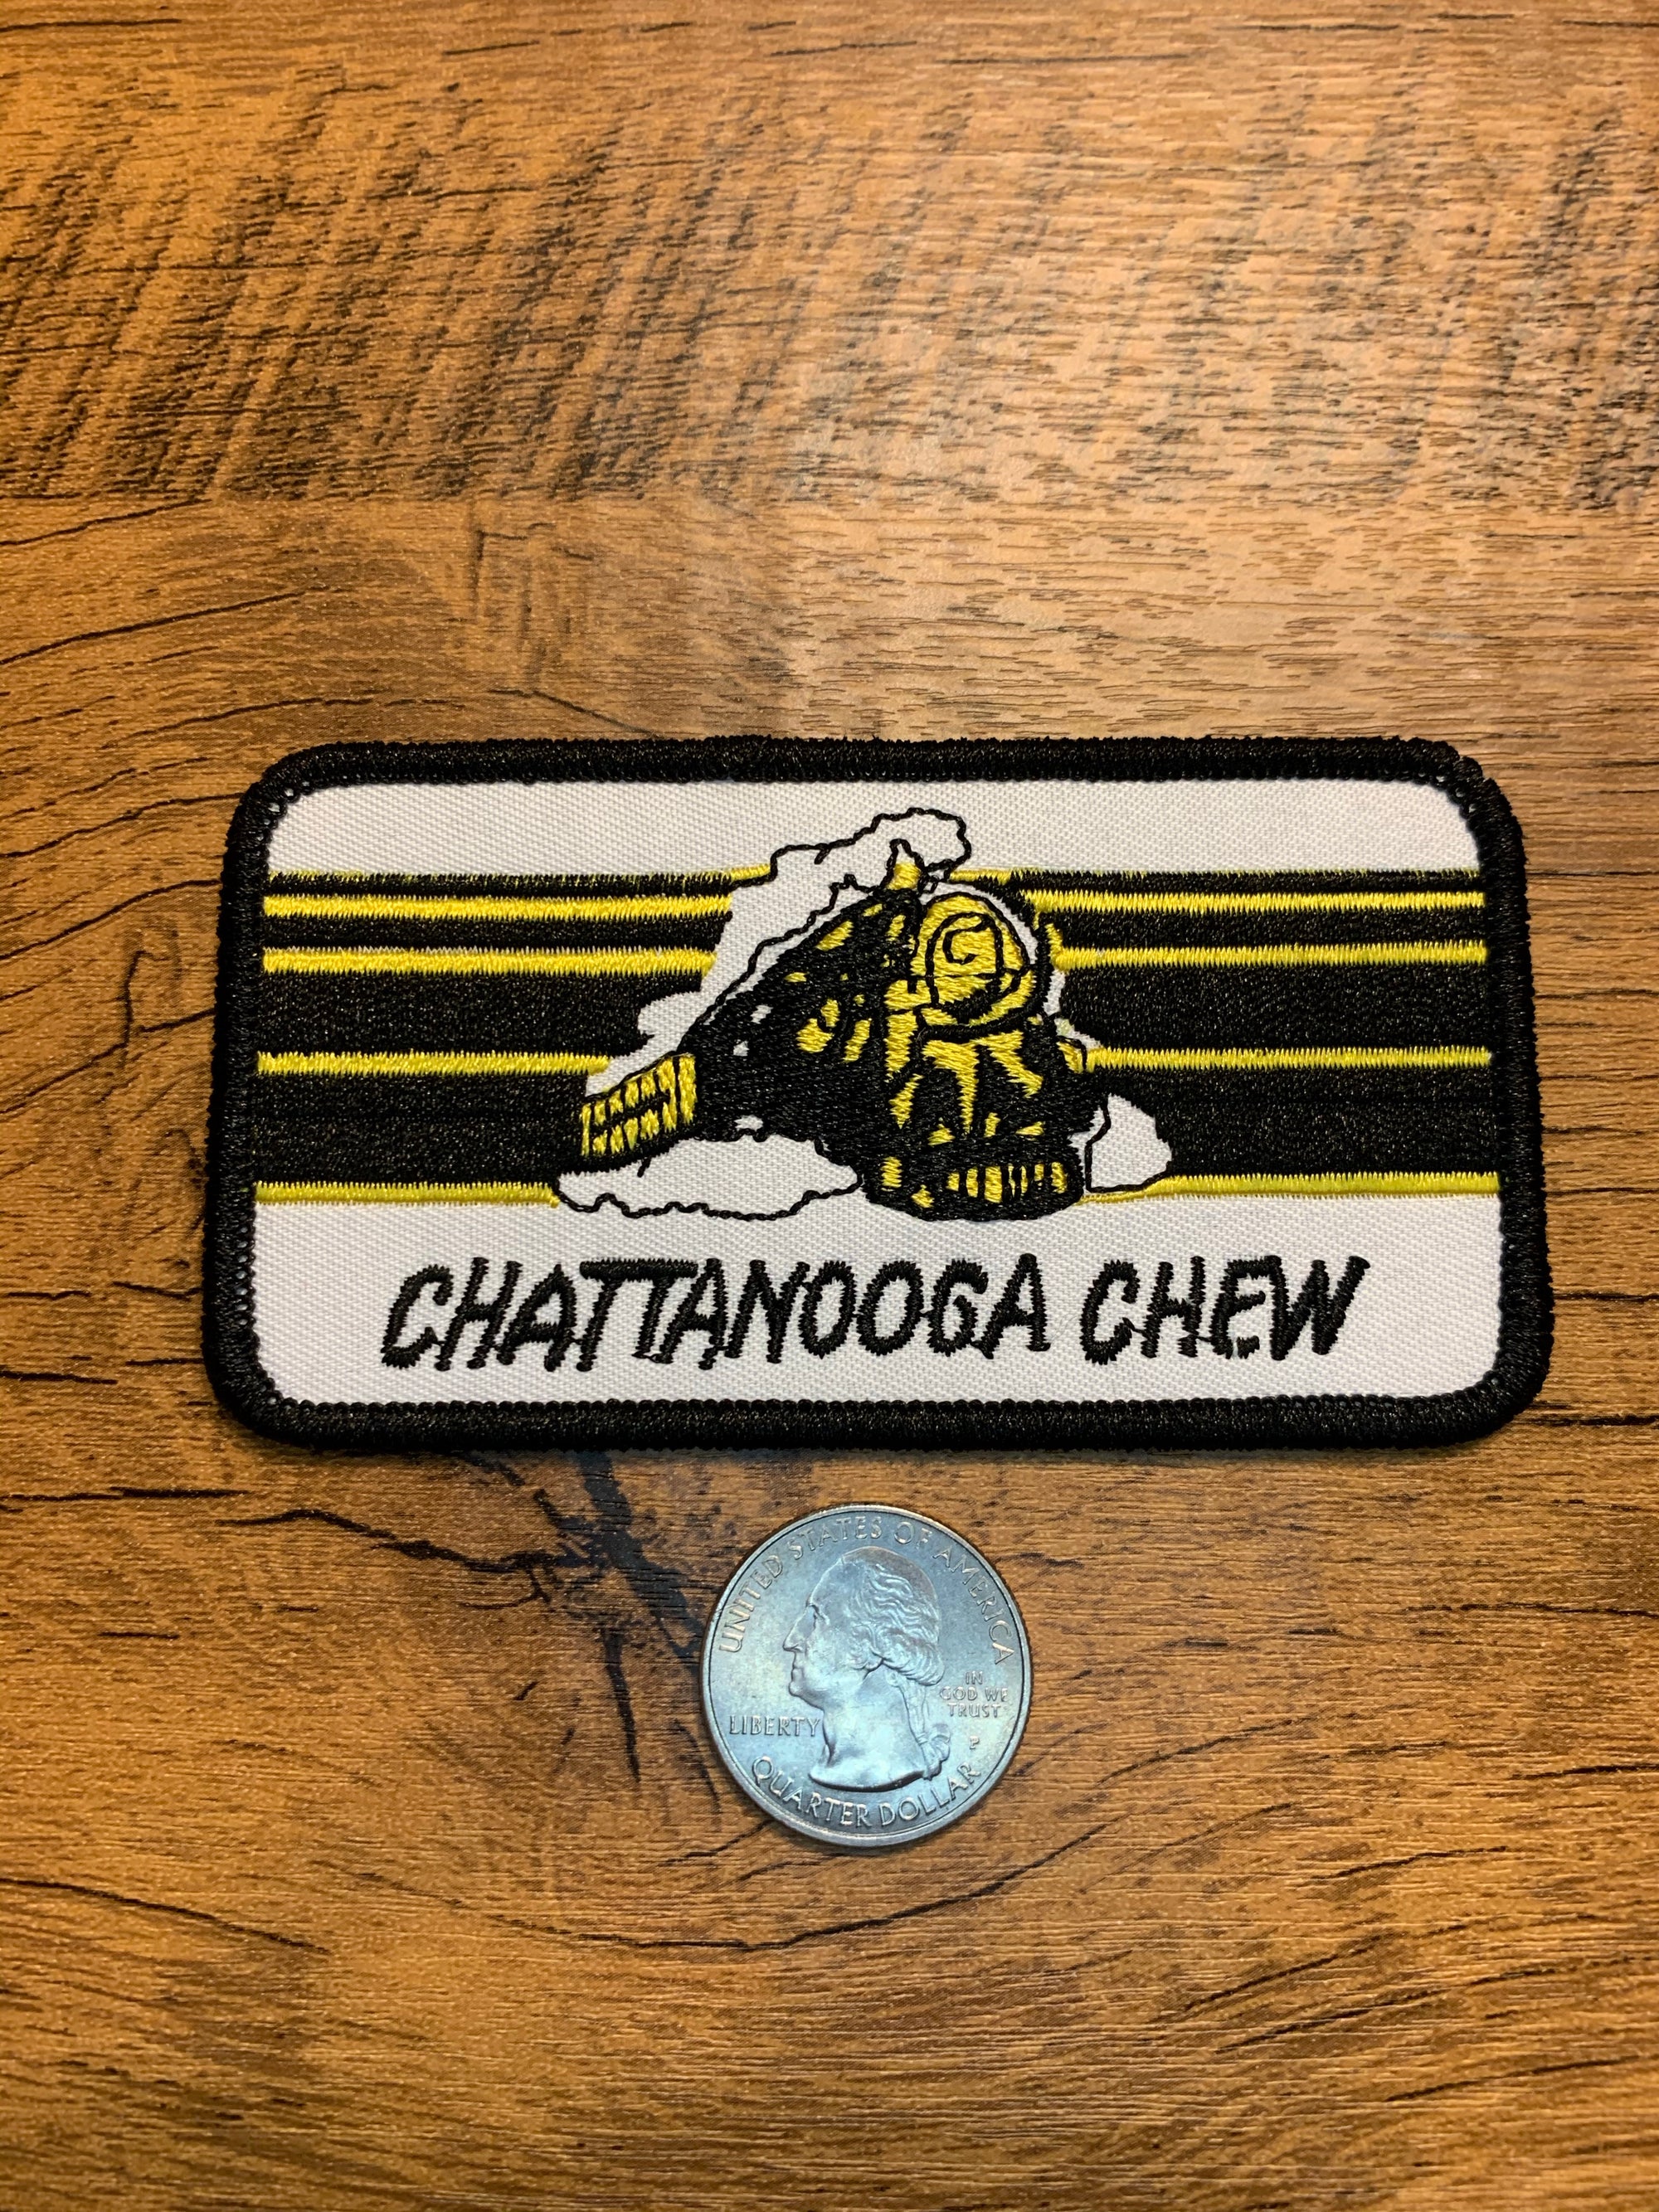 Chattanooga Chew, Chewing Tobacco, Dip